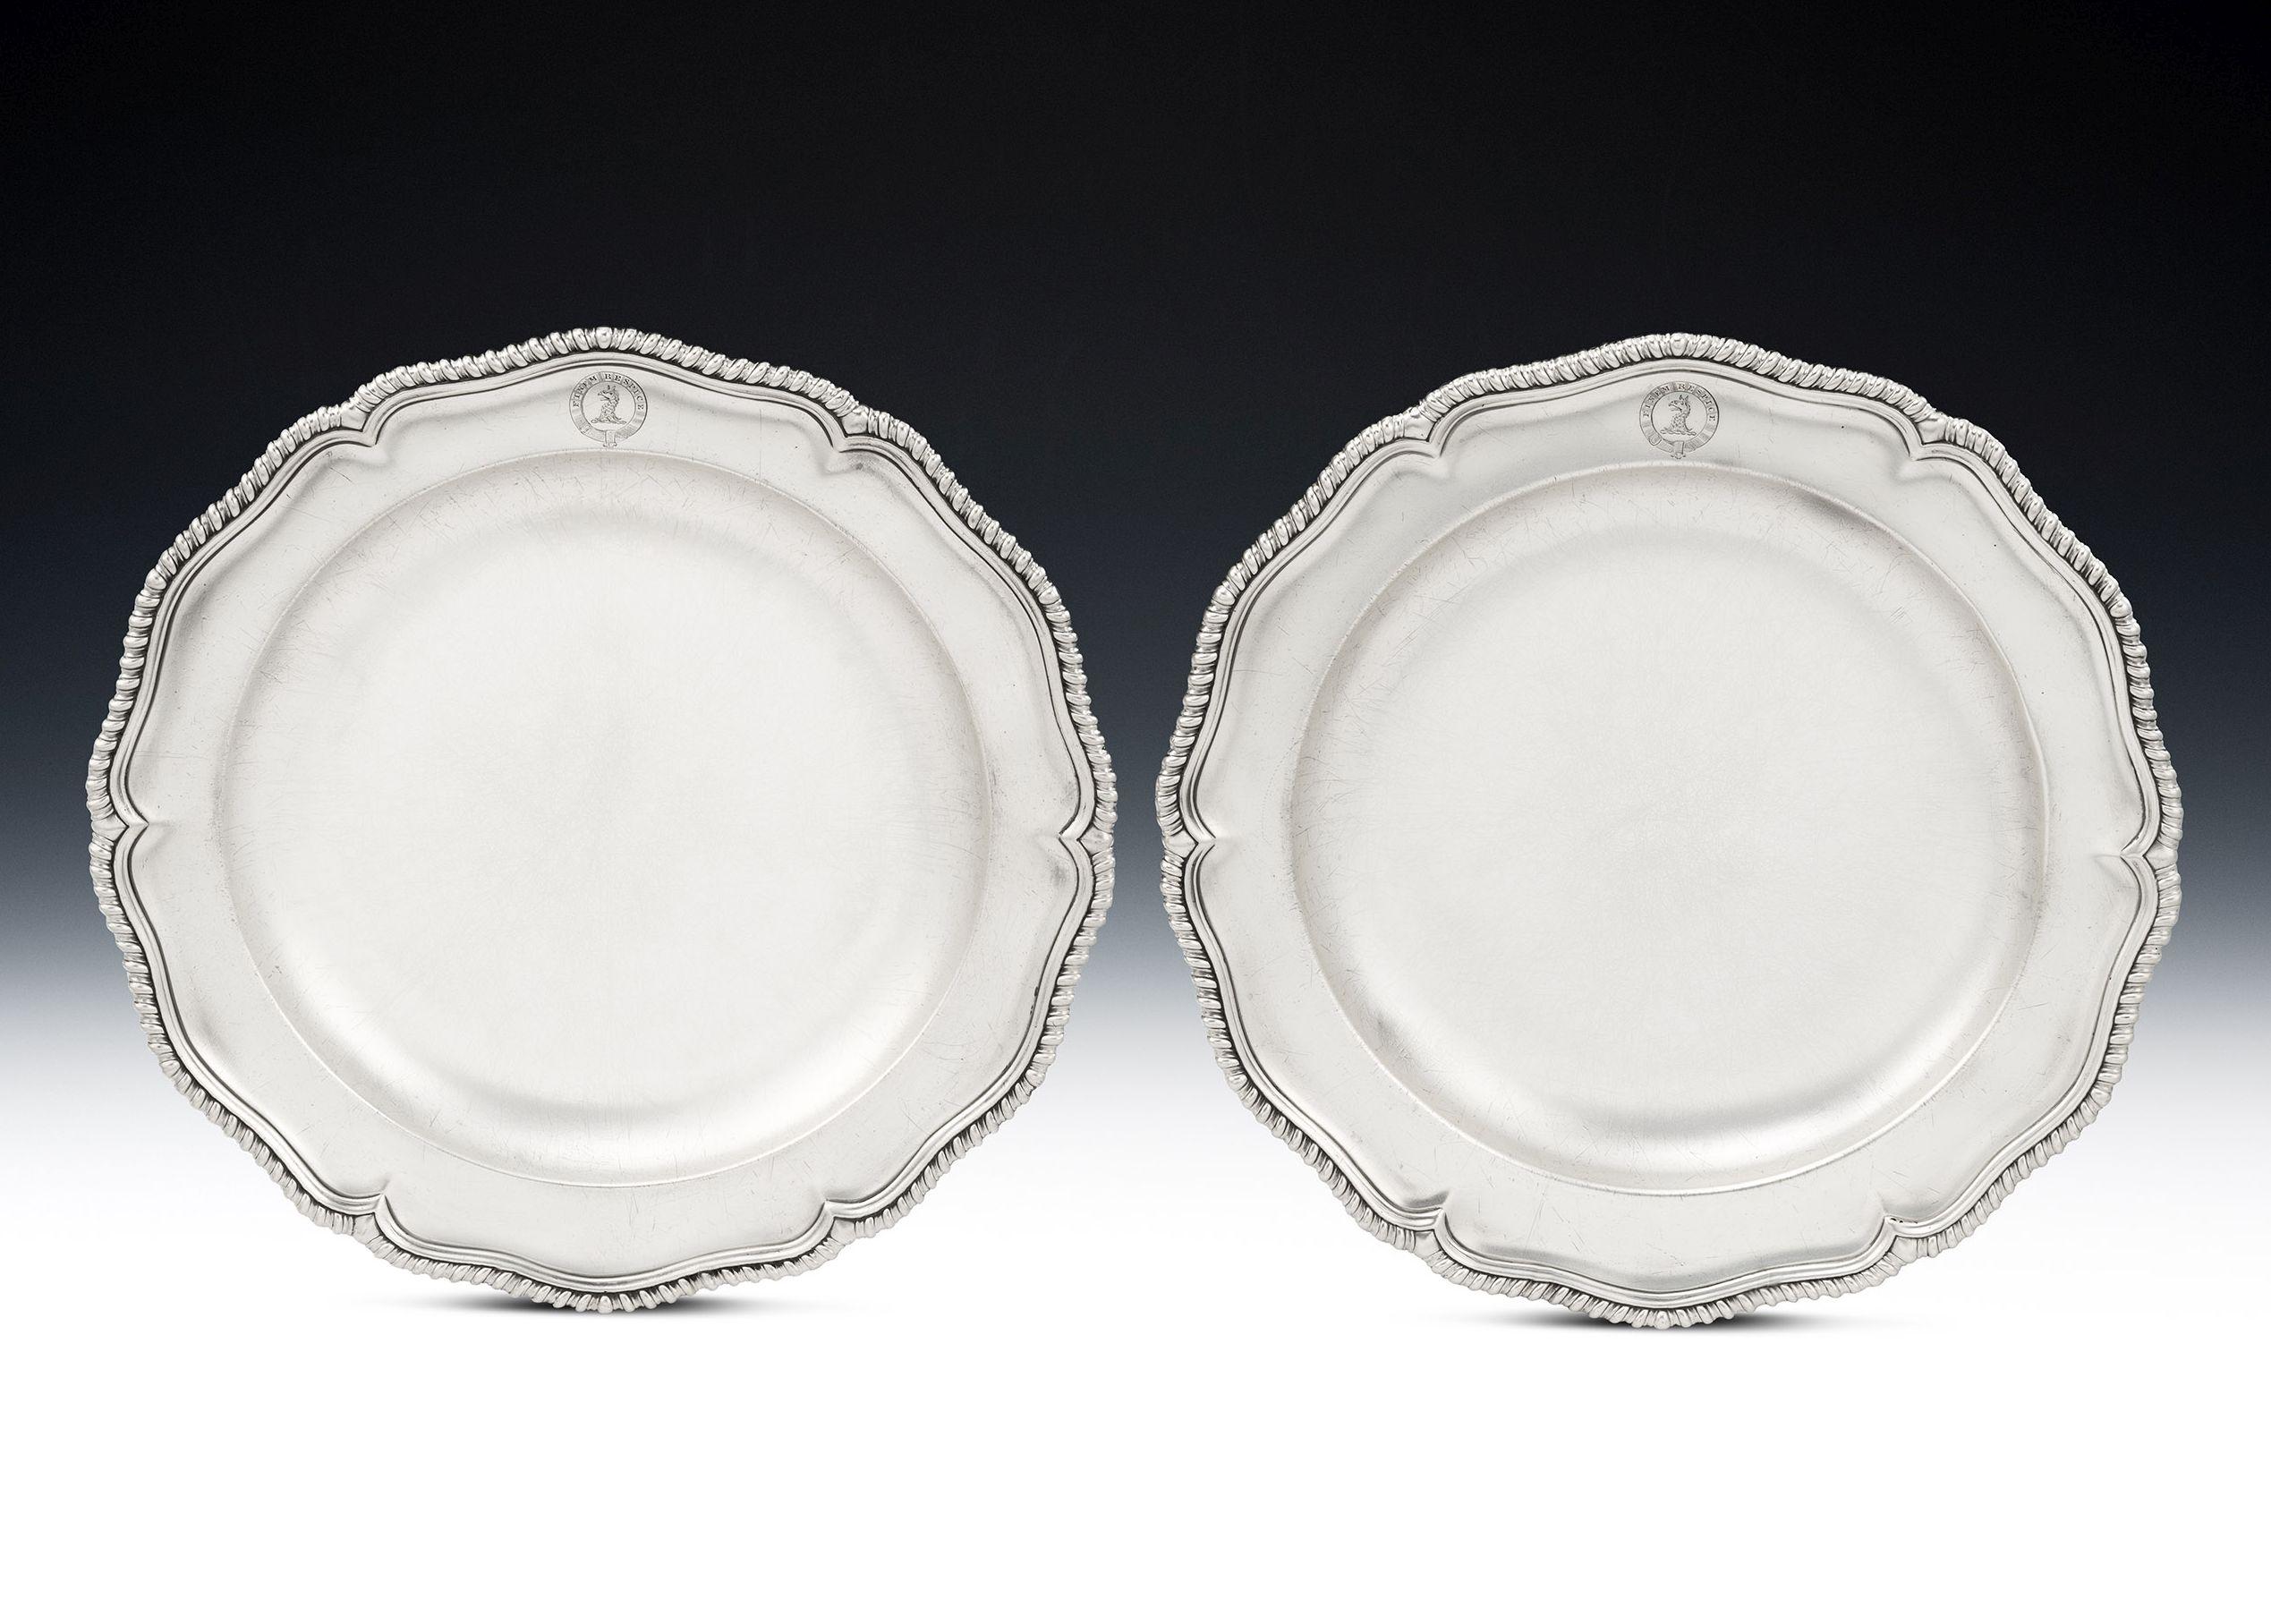 These very fine dishes are of a good large Size and are circular in form with a wide rim decorated with a shaped gadrooned band. Both have a deep bowl so that they could be used for serving a number of things on the dining table. The border is also